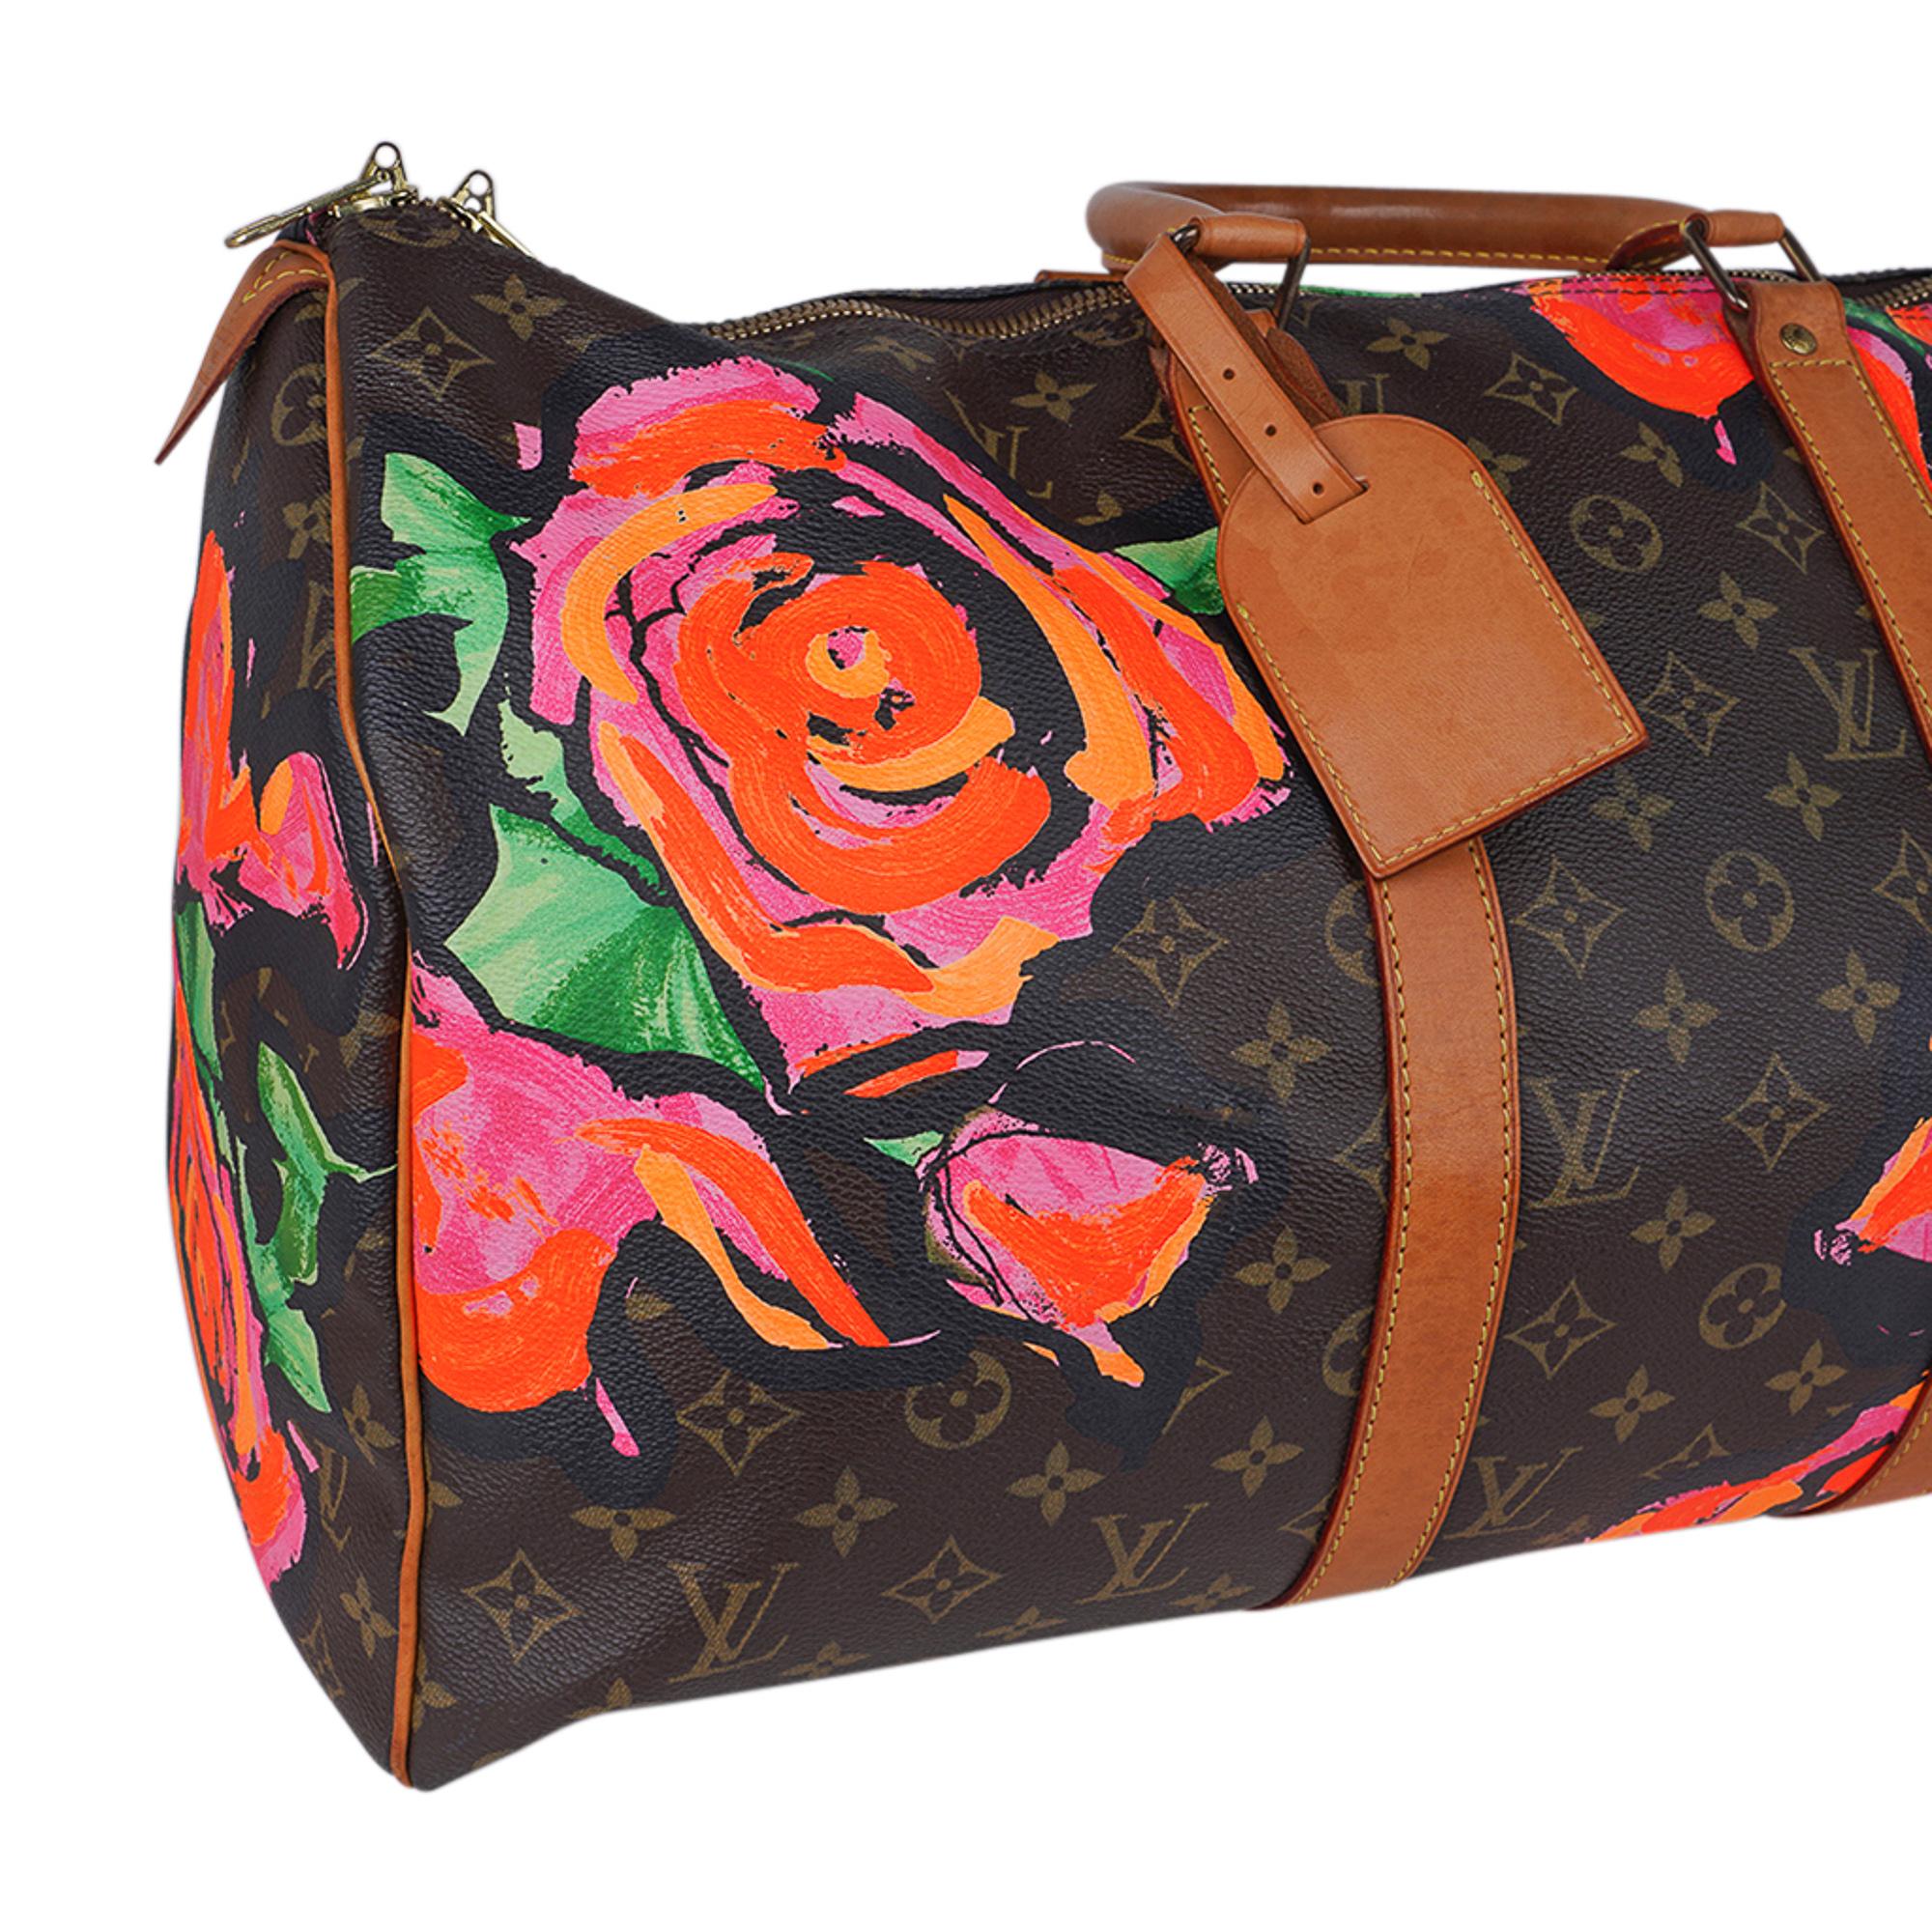 Louis Vuitton Stephen Sprouse x Monogram Roses Keepall 50 Limited Edition In Good Condition For Sale In Miami, FL